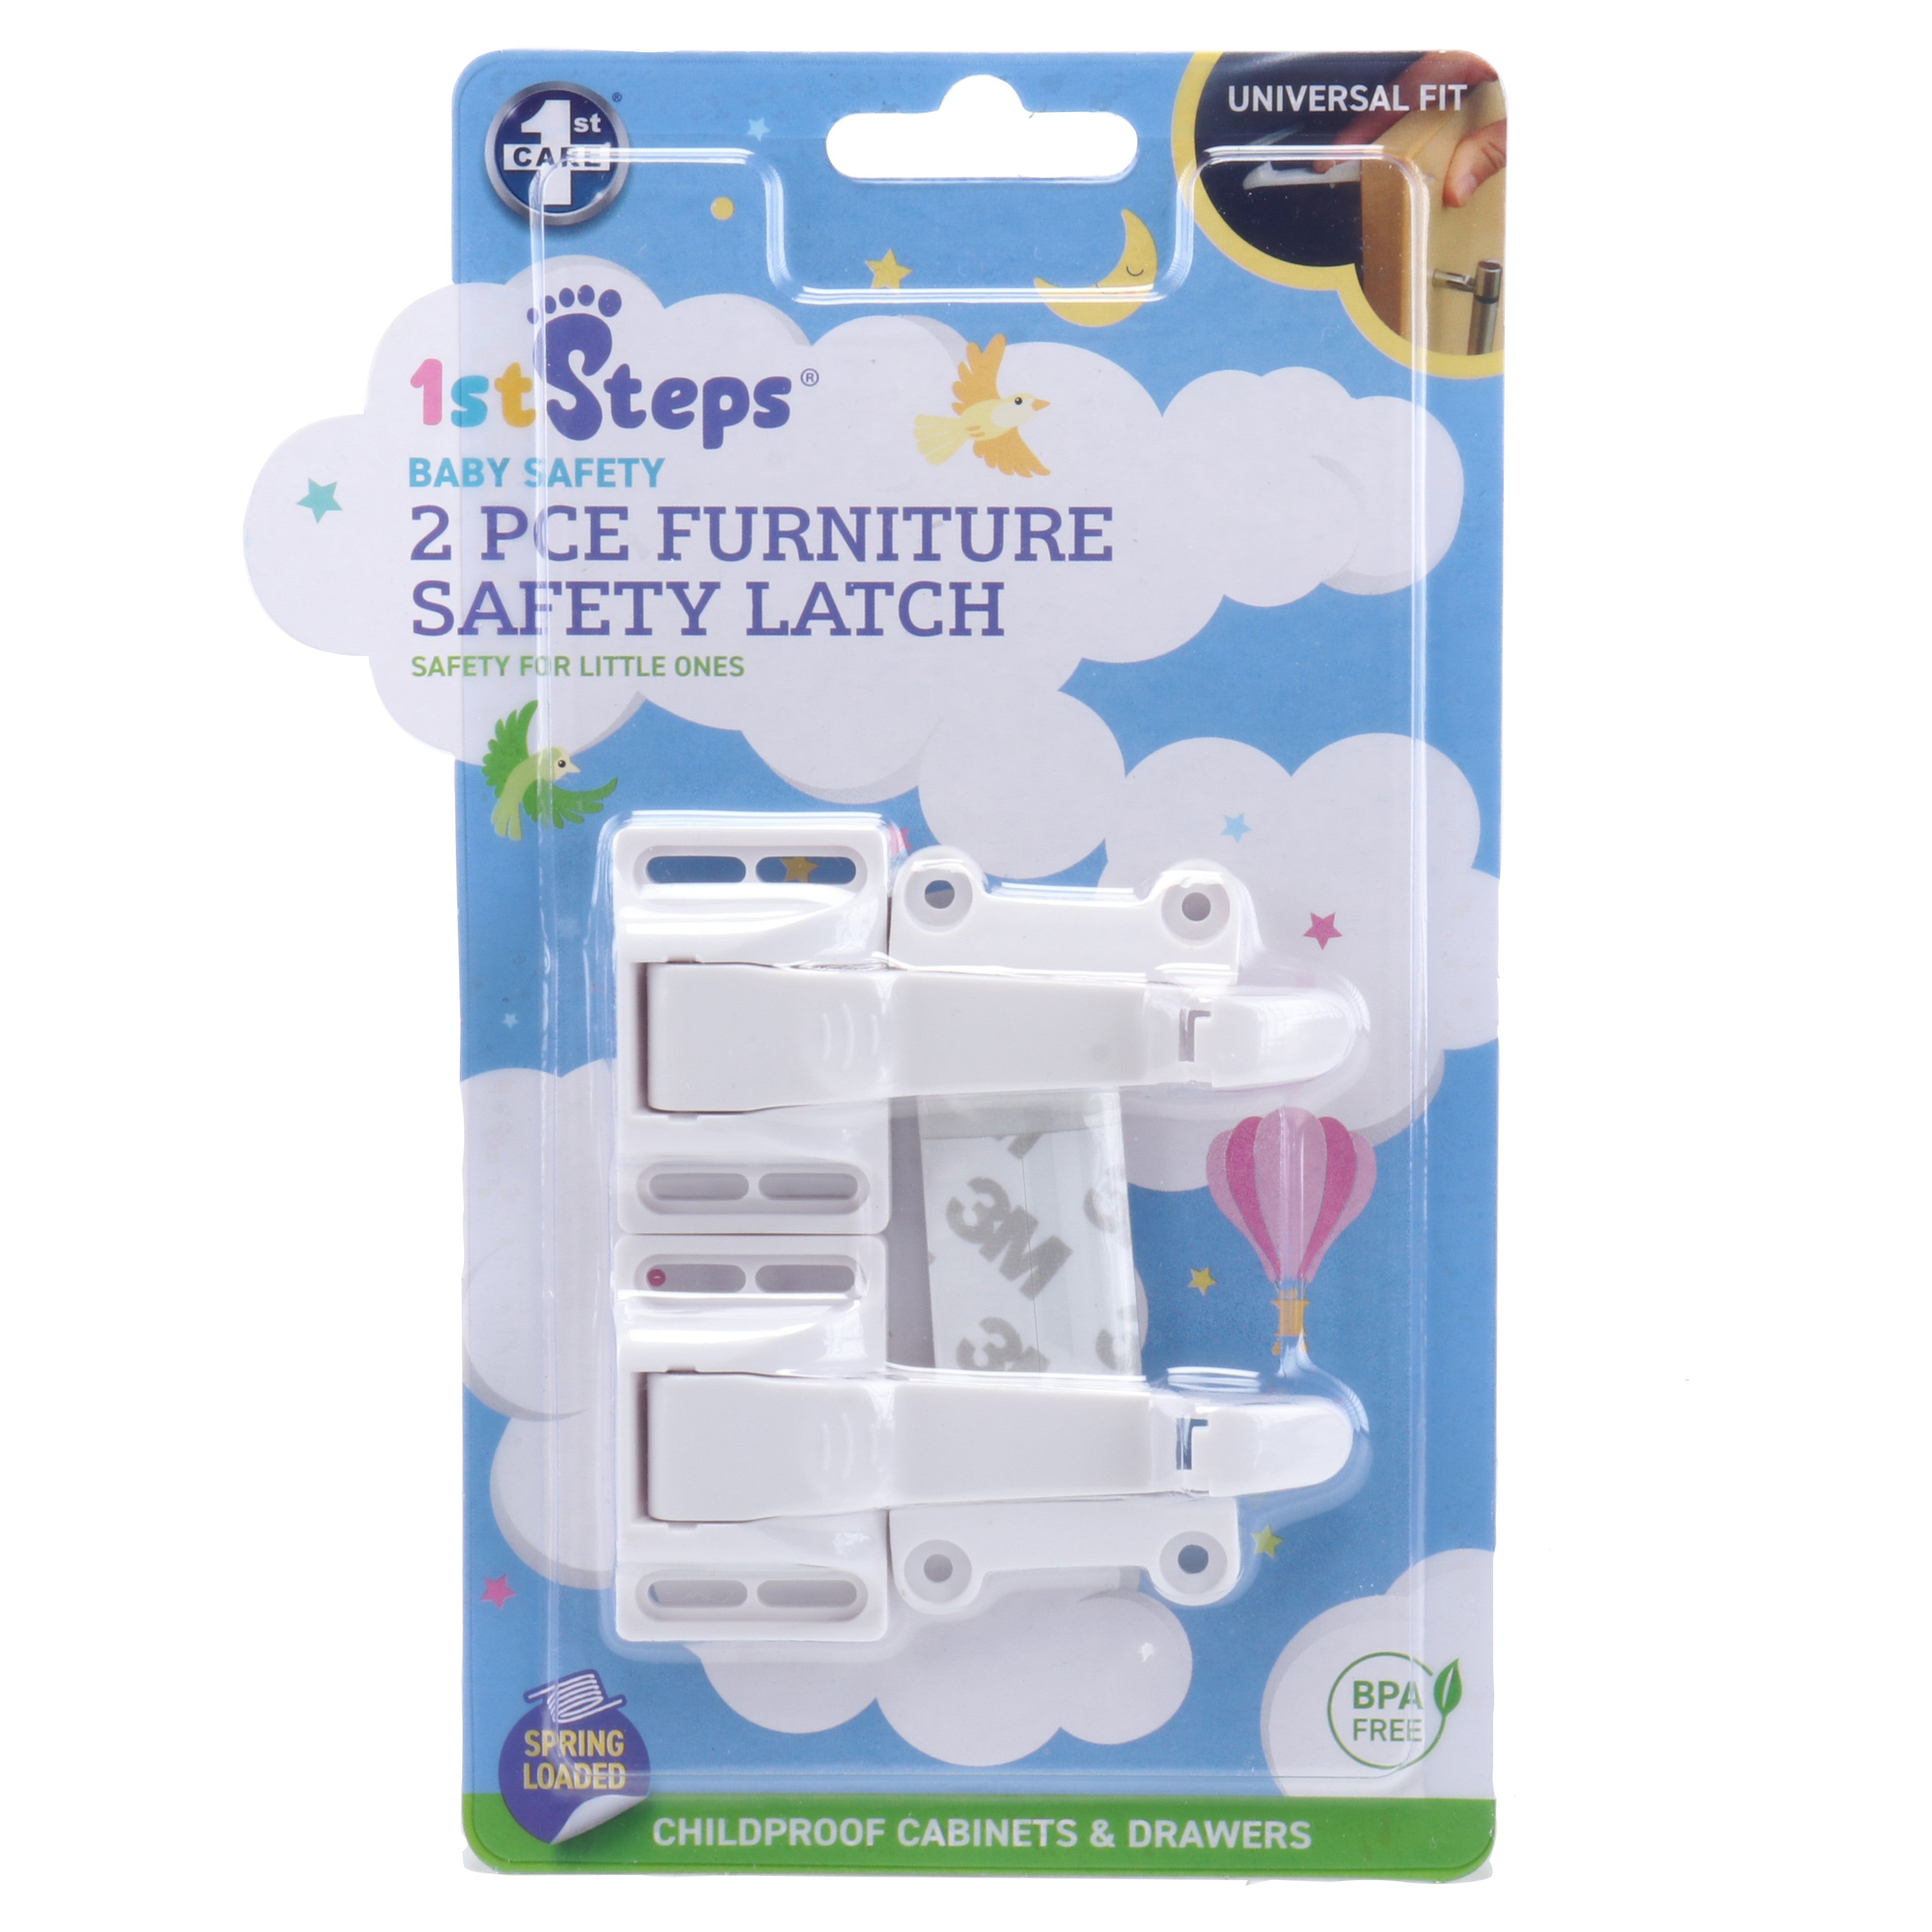 Baby Safety Furninture Safety Latch - 2 Piece - Dollars and Sense